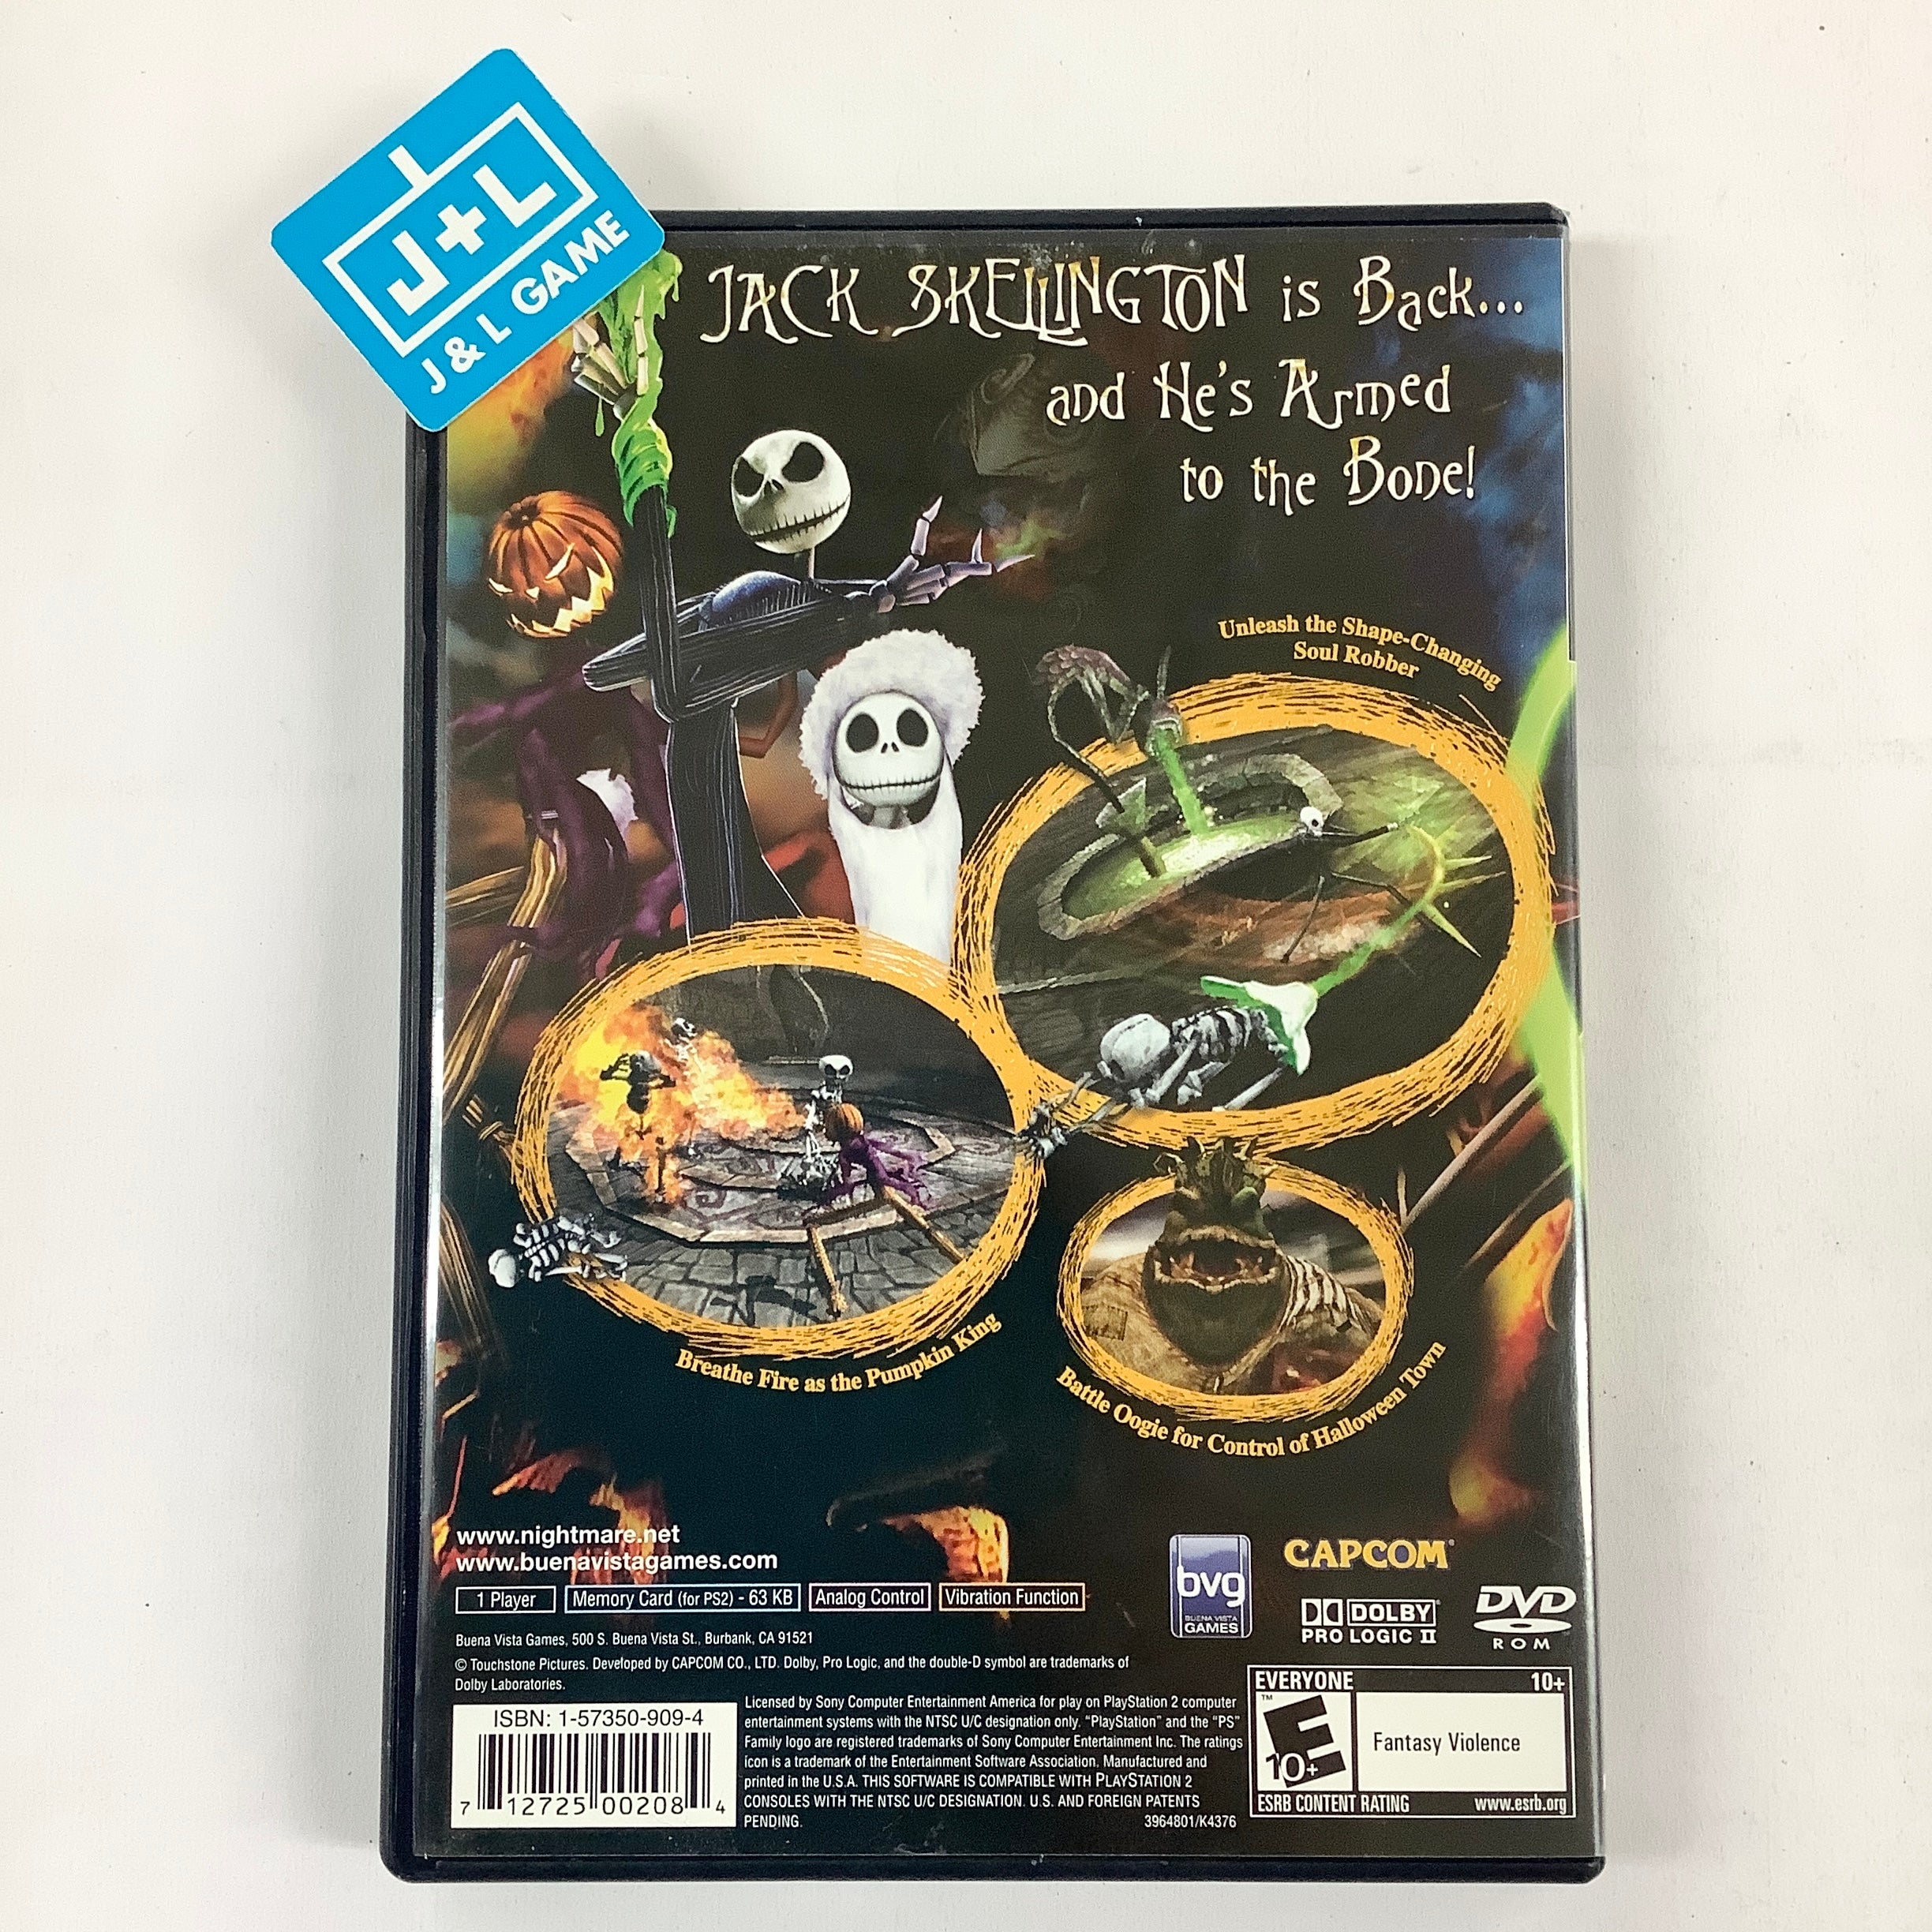 Tim Burton's The Nightmare Before Christmas: Oogie's Revenge - (PS2) PlayStation 2 [Pre-Owned] Video Games Buena Vista Games   